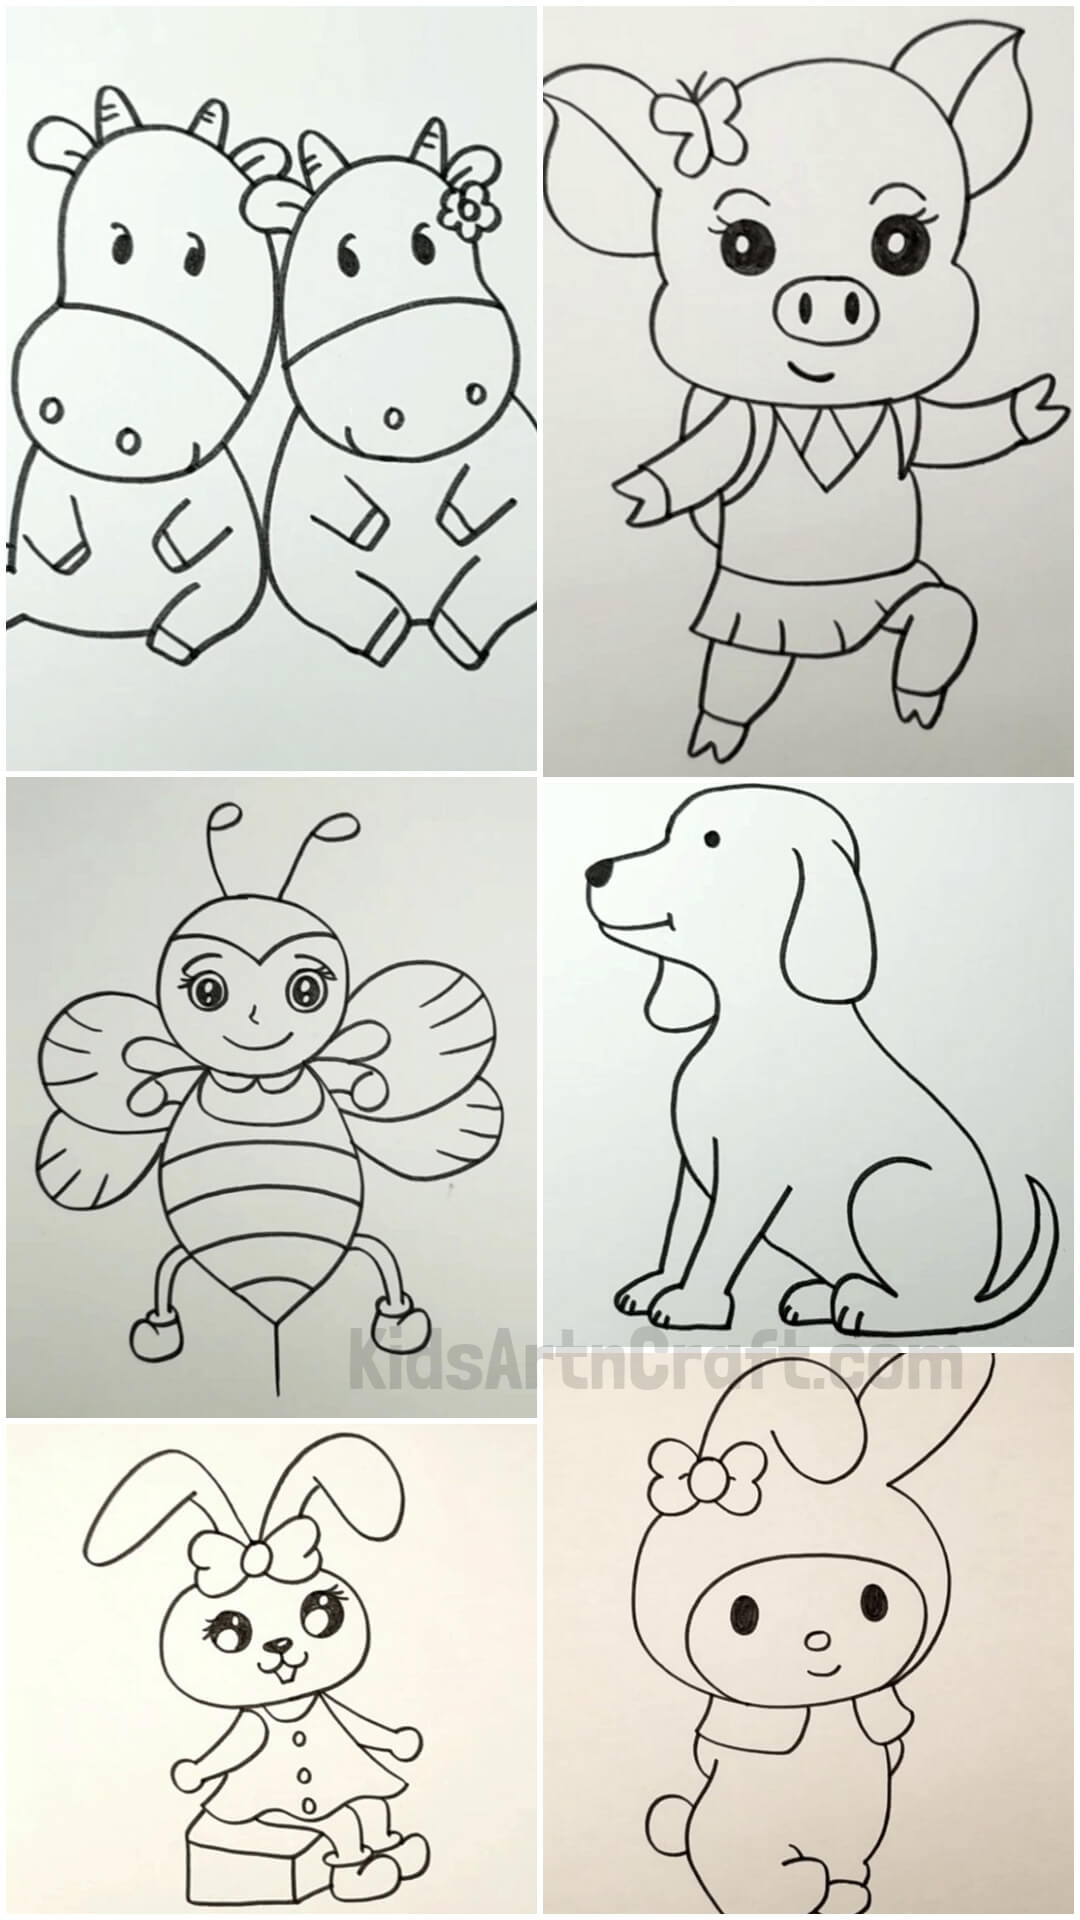 Black & White Drawings Ideas For Kids